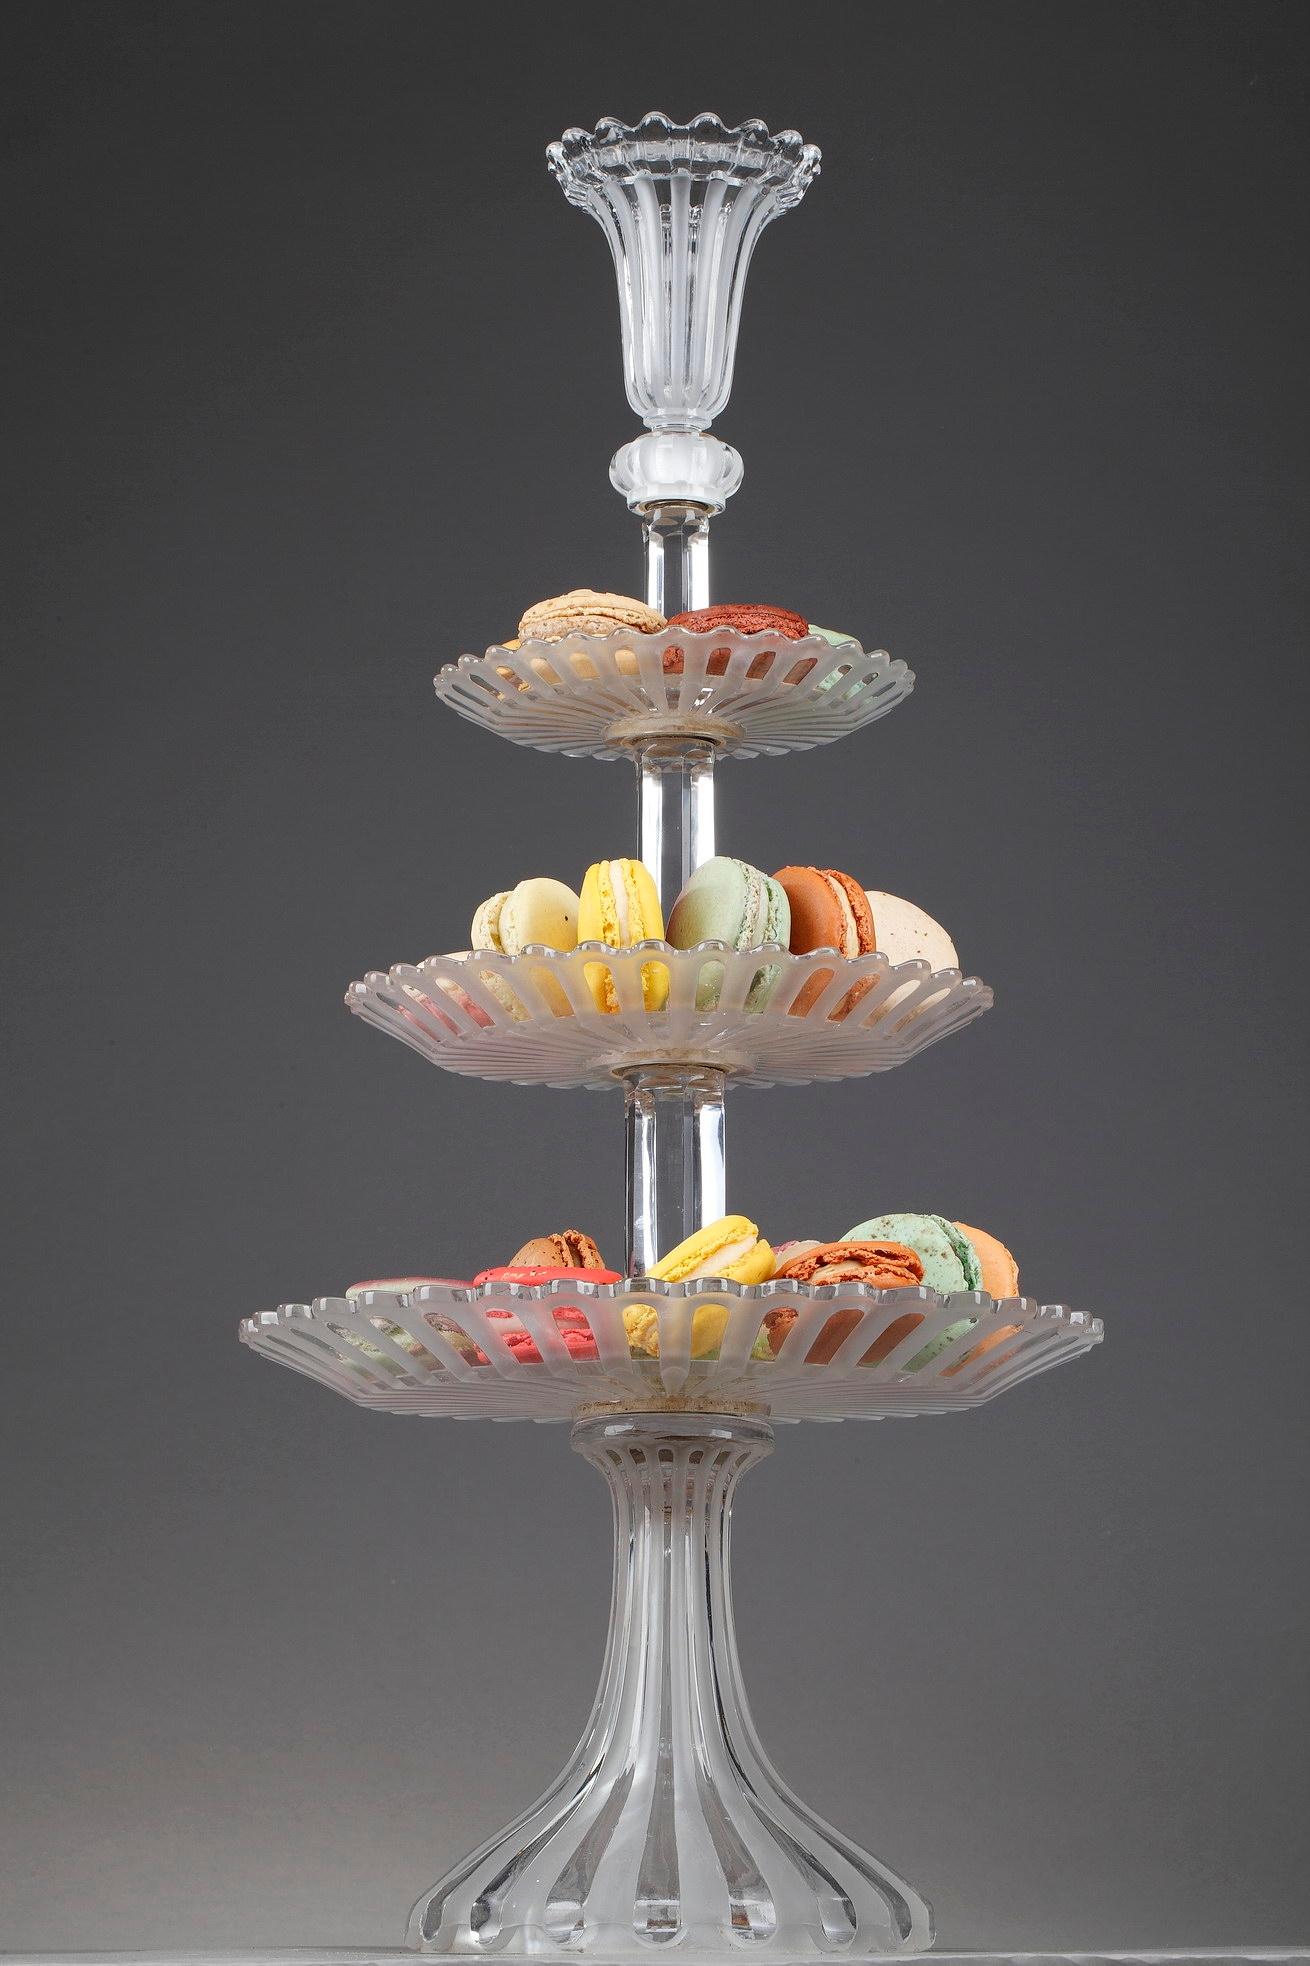 Baccarat Crystal Centerpiece, Late 19th Century Period 14